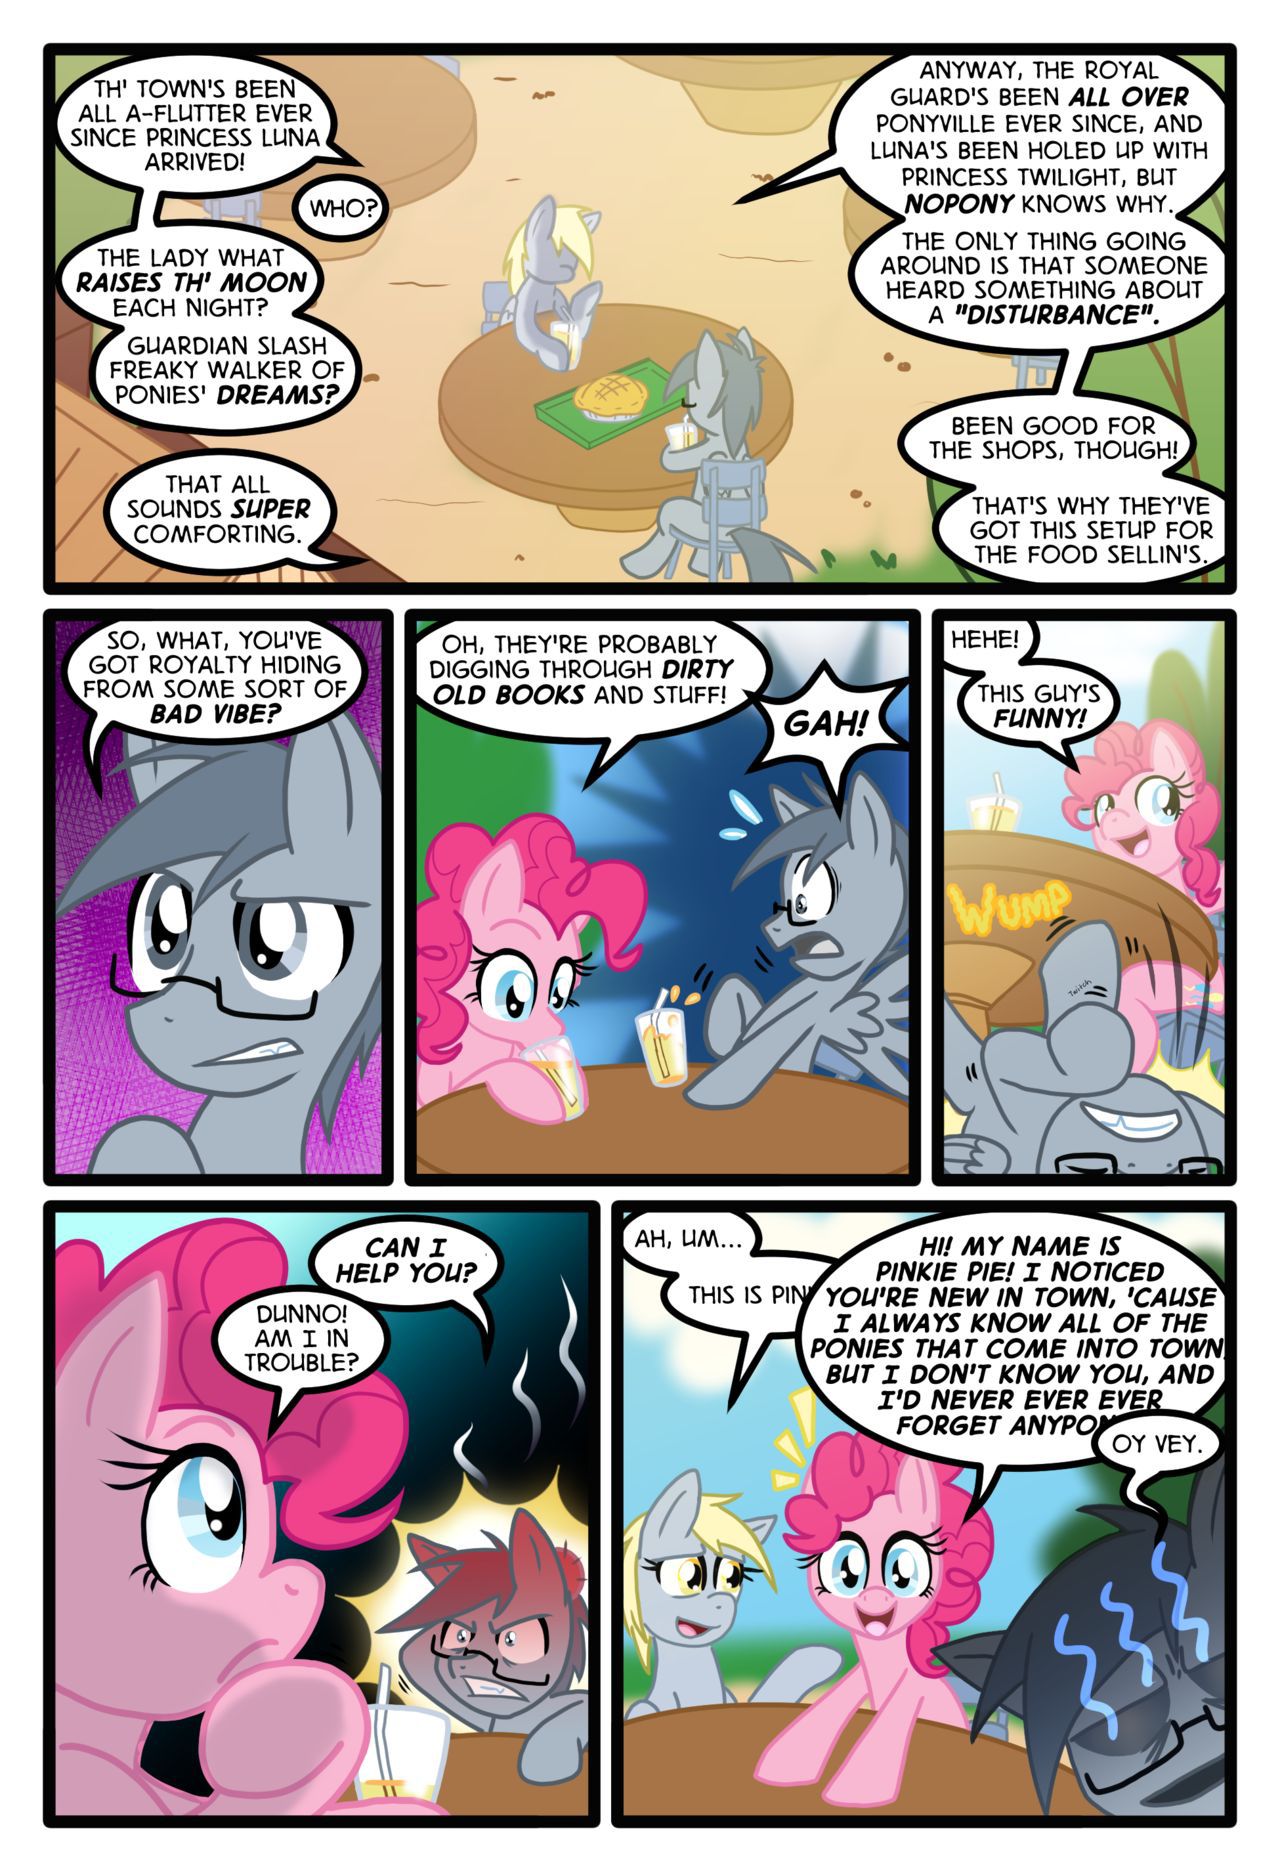 [Zaron] Lonely Hooves (My Little Pony Friendship Is Magic) [Ongoing] 17